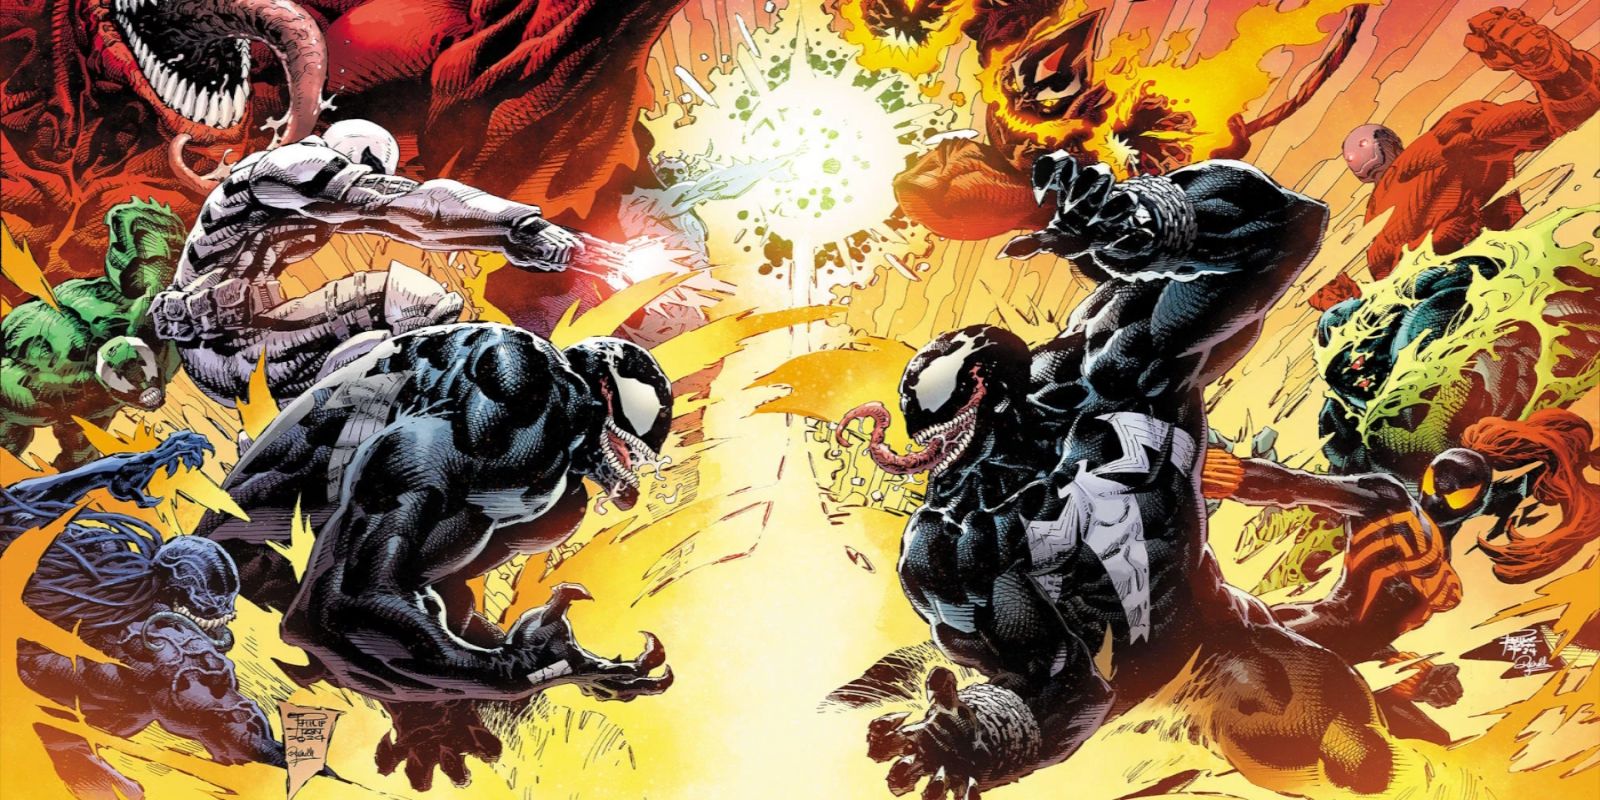 Venom War promotional material, two versions of Venom lead various symbiote characters into battle